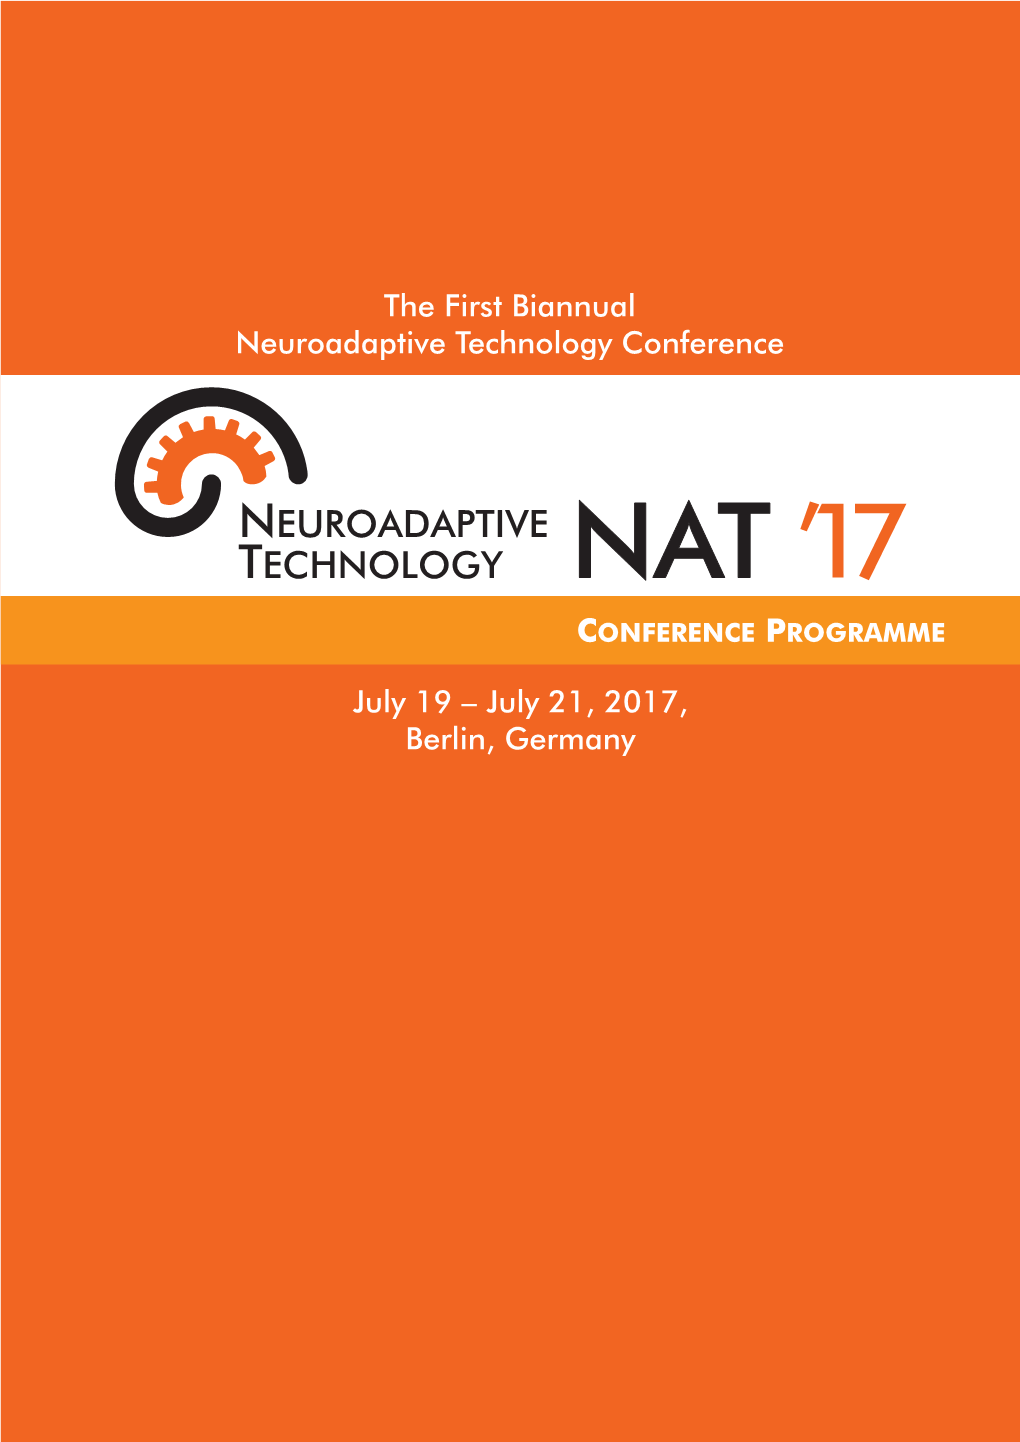 Nat ’17 Cponference Rogramme